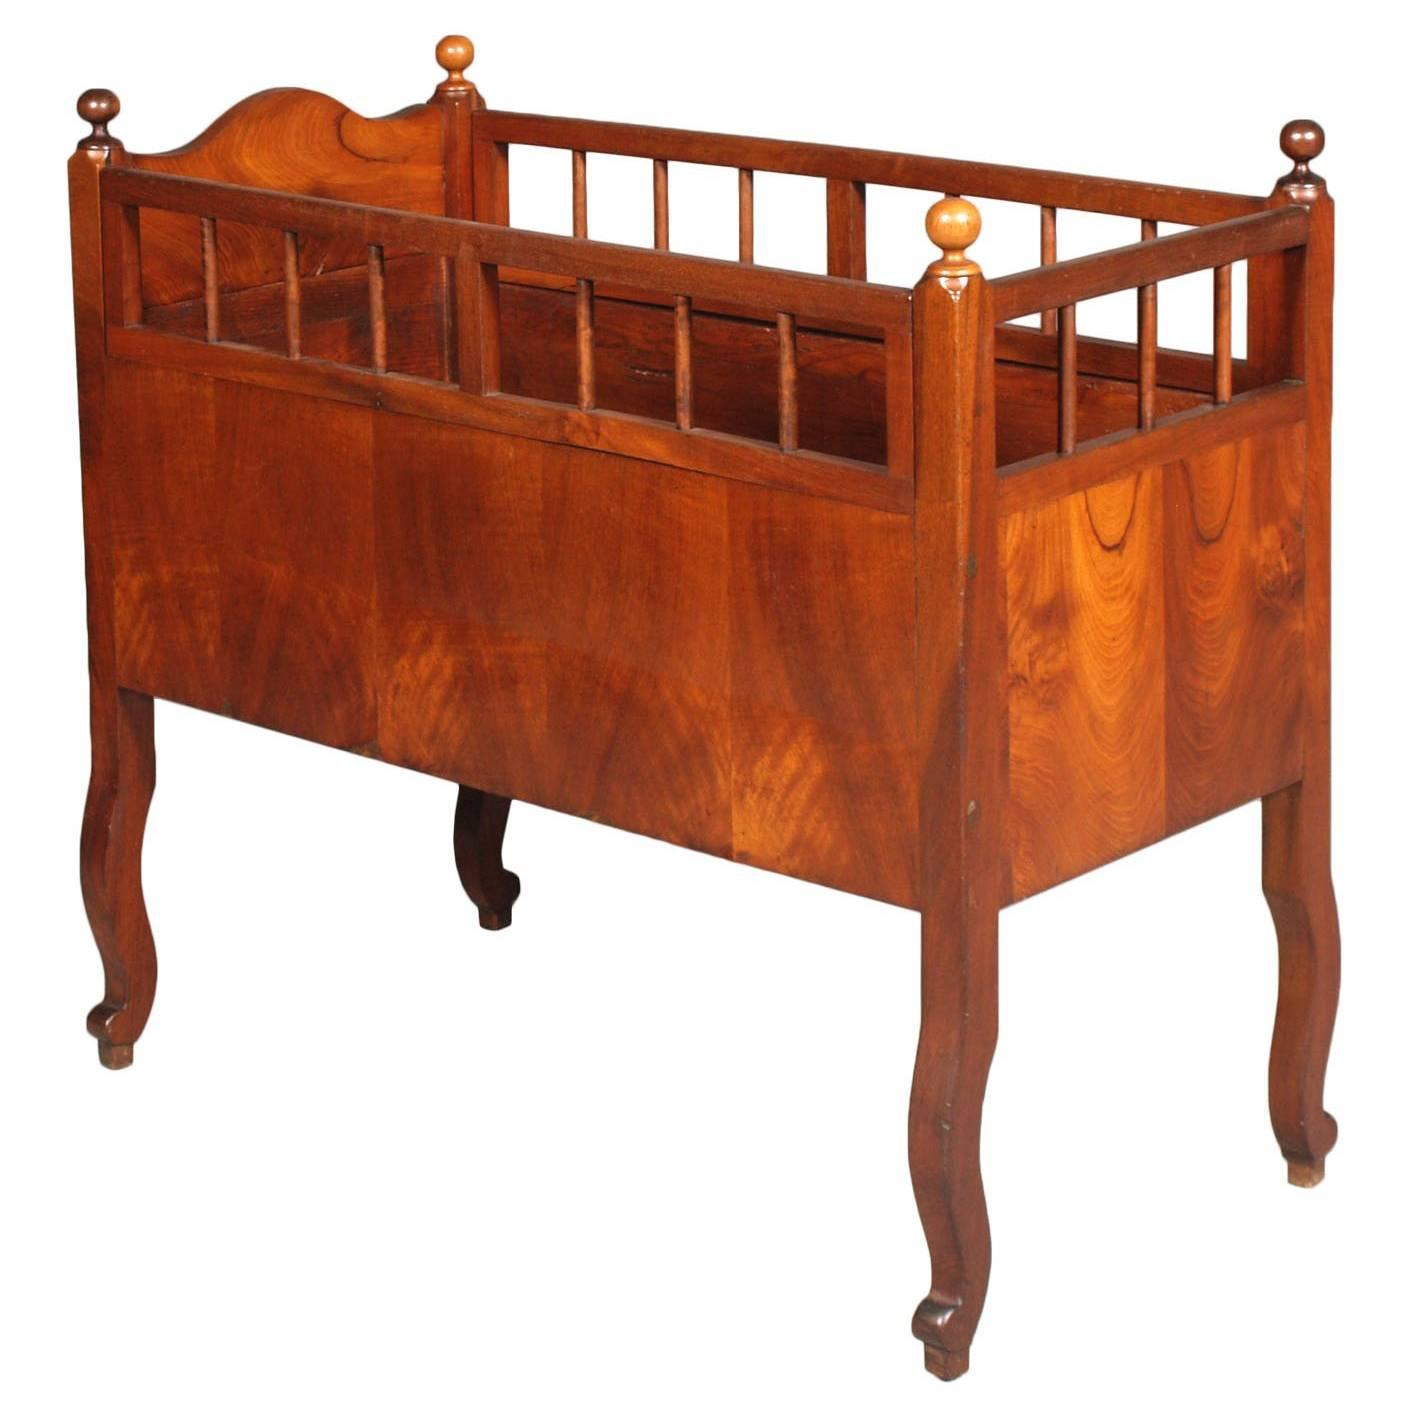 19th Century Cradle Baby Cot in Walnut sanitized and wax polished